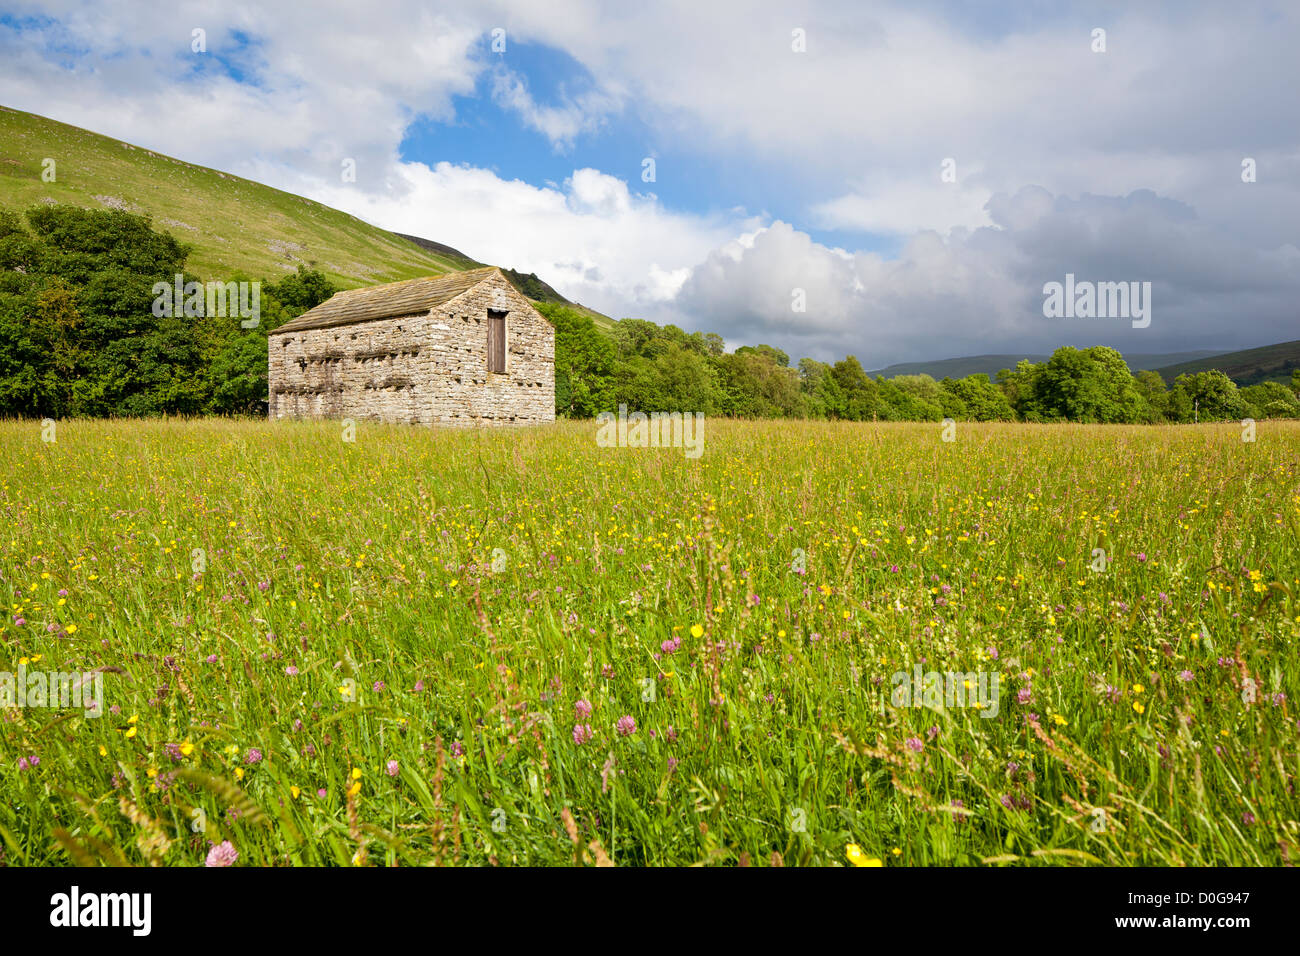 Hay meadow and fieldbarn at Muker, Swaledale in The Yorkshire Dales National Park, UK Stock Photo